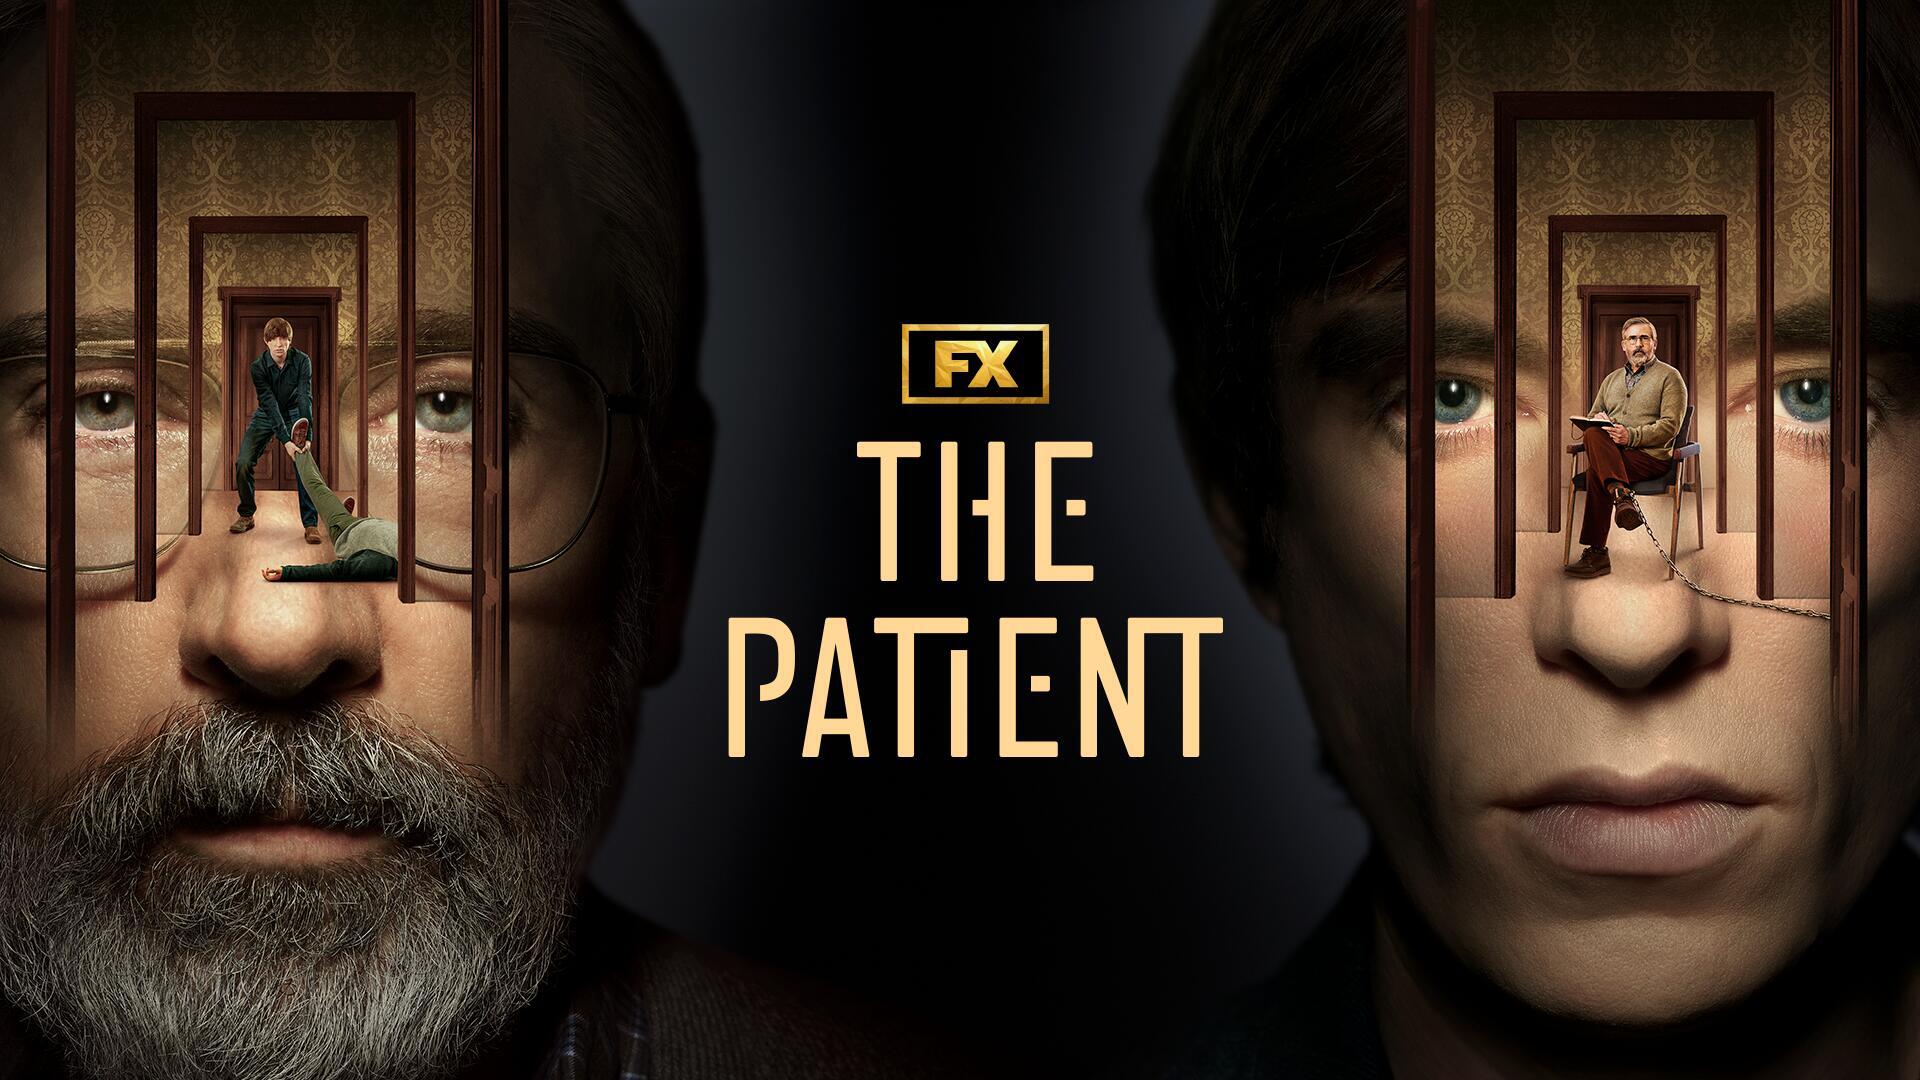 The Patient -- Season 1 -- “The Patient” is a psychological thriller from the minds of Joel Fields and Joe Weisberg (“The Americans”) about a therapist, “Alan Strauss” (Steve Carell), who's held prisoner by a patient, “Sam Fortner” (Domhnall Gleeson), who reveals himself to be a serial killer. Sam has an unusual therapeutic demand for Alan: curb his homicidal urges. In order to survive, Alan must unwind Sam's disturbed mind and stop him from killing again... but Sam refuses to address critical topics, like his mother “Candace” (Linda Emond). Alone in captivity, Alan excavates his own past through memories of his old therapist, “Charlie” (David Alan Grier), and grapples with waves of his own repressed troubles – the recent death of his wife, “Beth” (Laura Niemi), and the painful estrangement from his religious son, “Ezra” (Andrew Leeds). Over the course of his imprisonment, Alan uncovers not only how deep Sam's compulsion runs, but also how much work he has to do to repair the rift in his own family. With time running out, Alan fights desperately to stop Sam before Alan becomes complicit in Sam's murders or worse – becomes a target himself. Alan Strauss (Steve Carell) and Sam Fortner (Domhnall Gleeson), shown. (Courtesy of FX Networks)